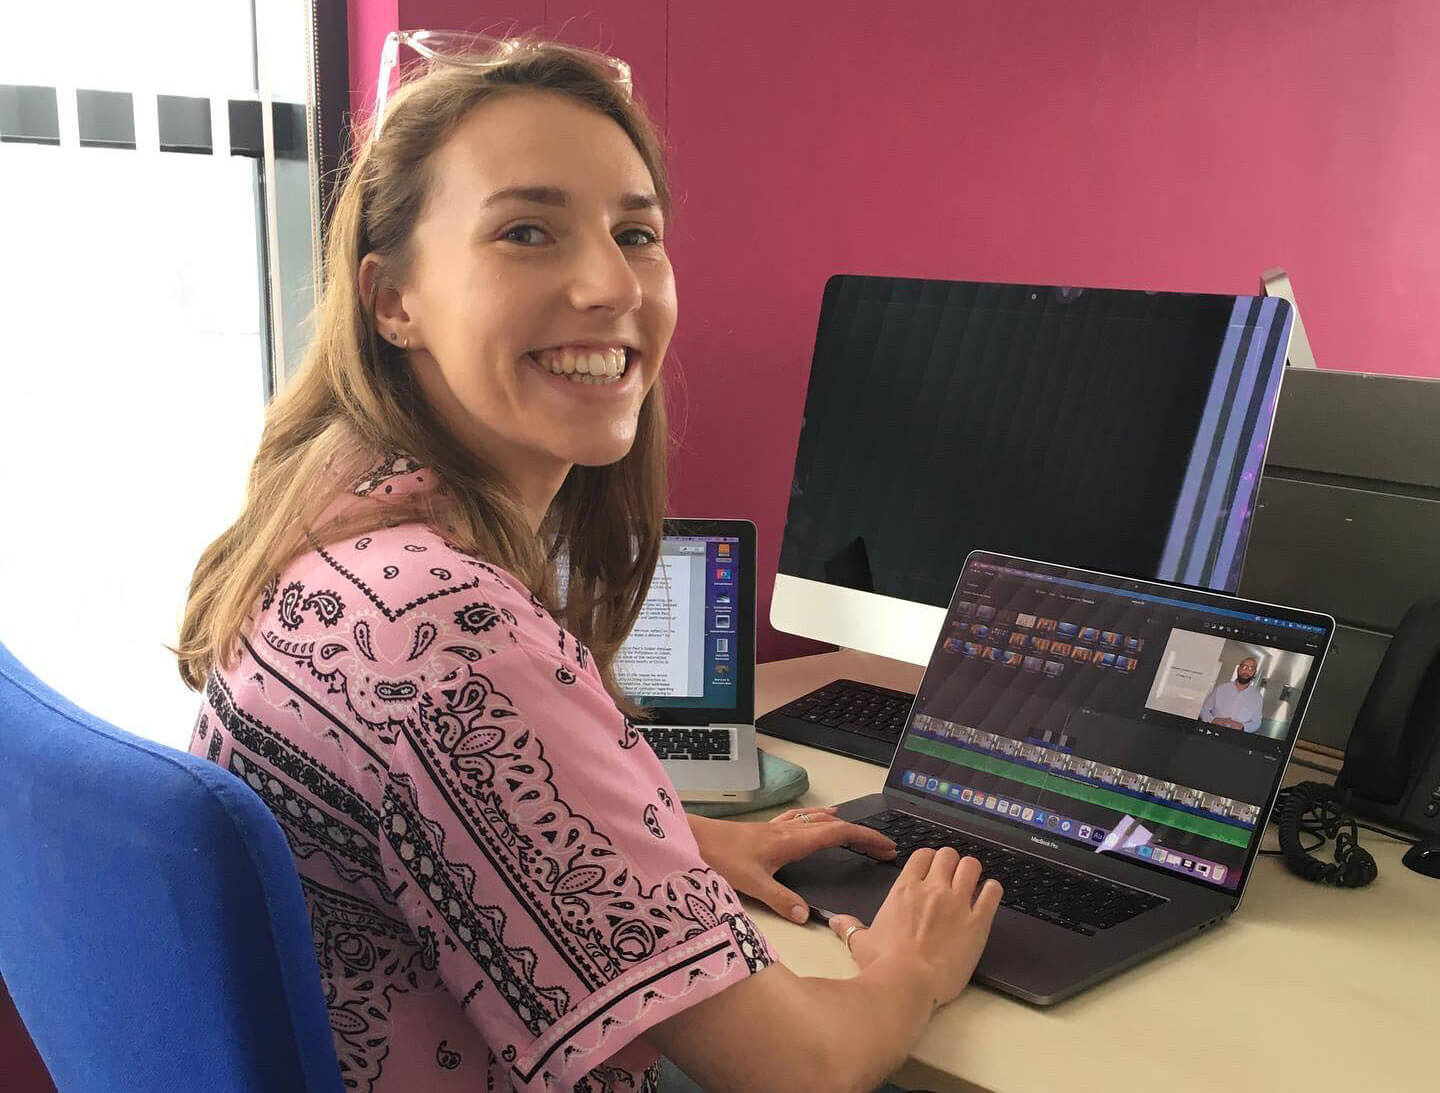 Lucy McAllister is currently editing LMI’s new video teaching course on the life of the Apostle Paul, which will become part of the Leadership Study Programme within our Bible Teaching Ministry